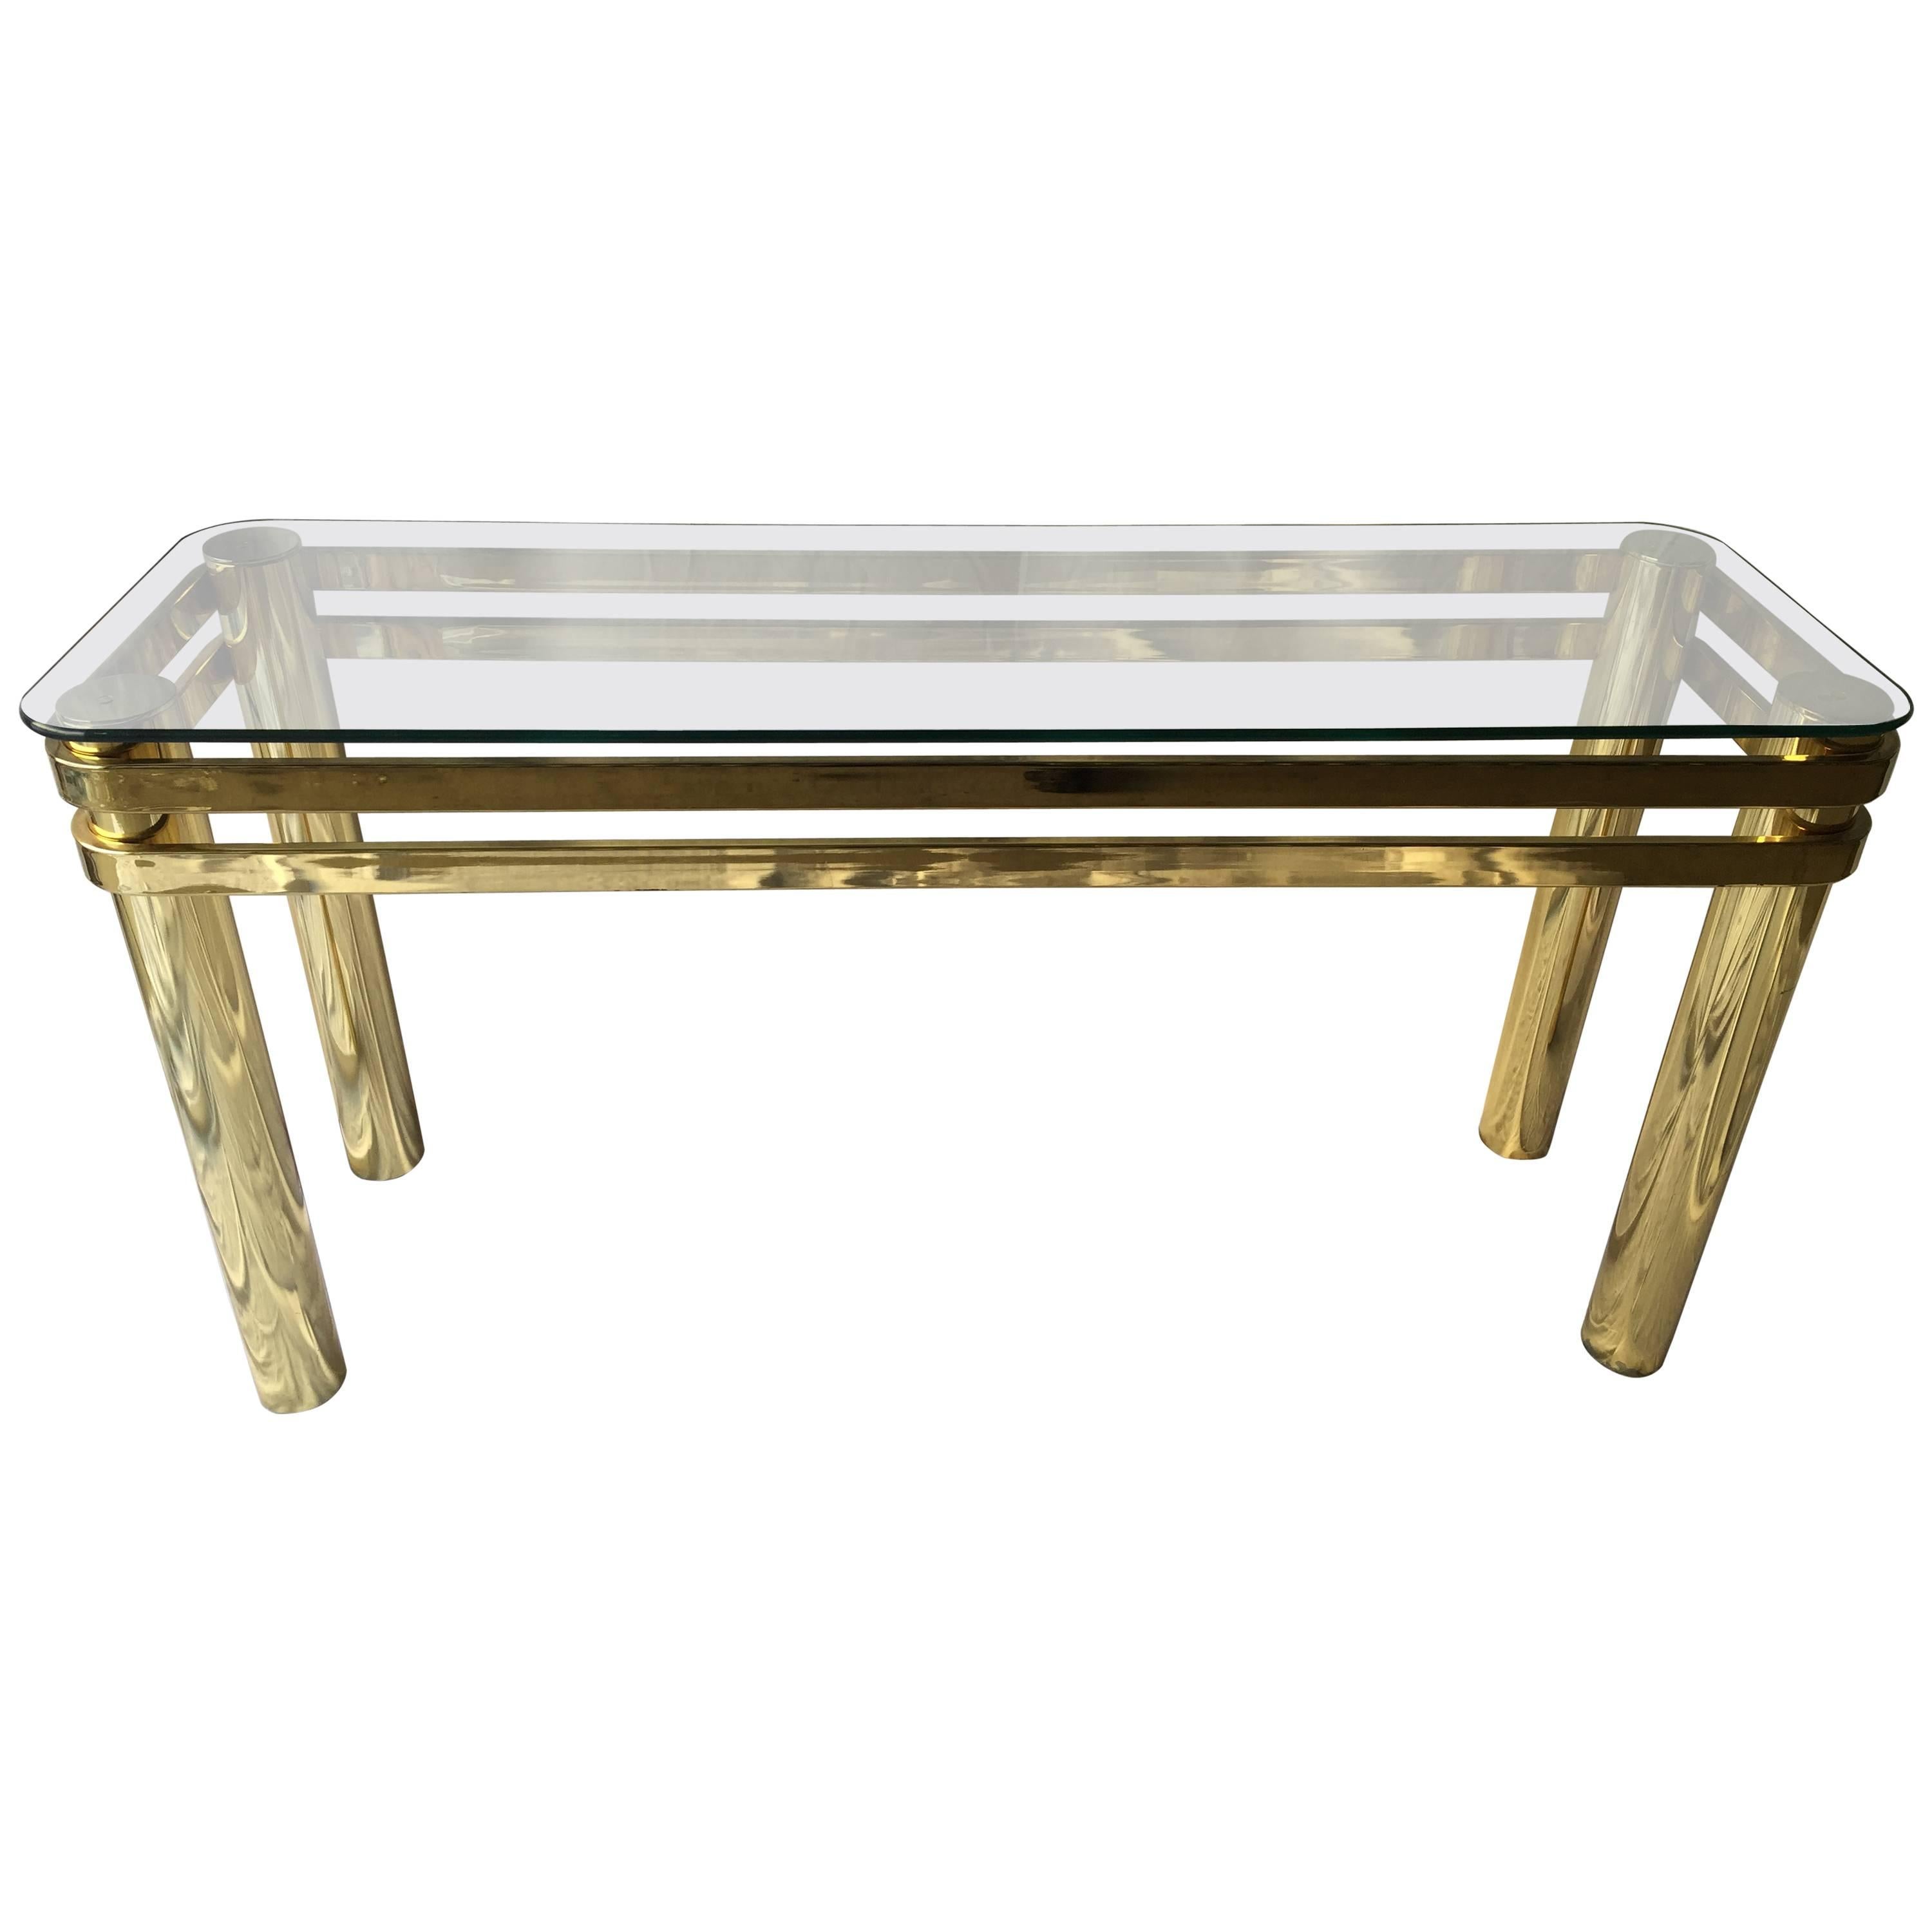 Vintage Pace Style Brass Console Table with Tubular Legs and Banded Design